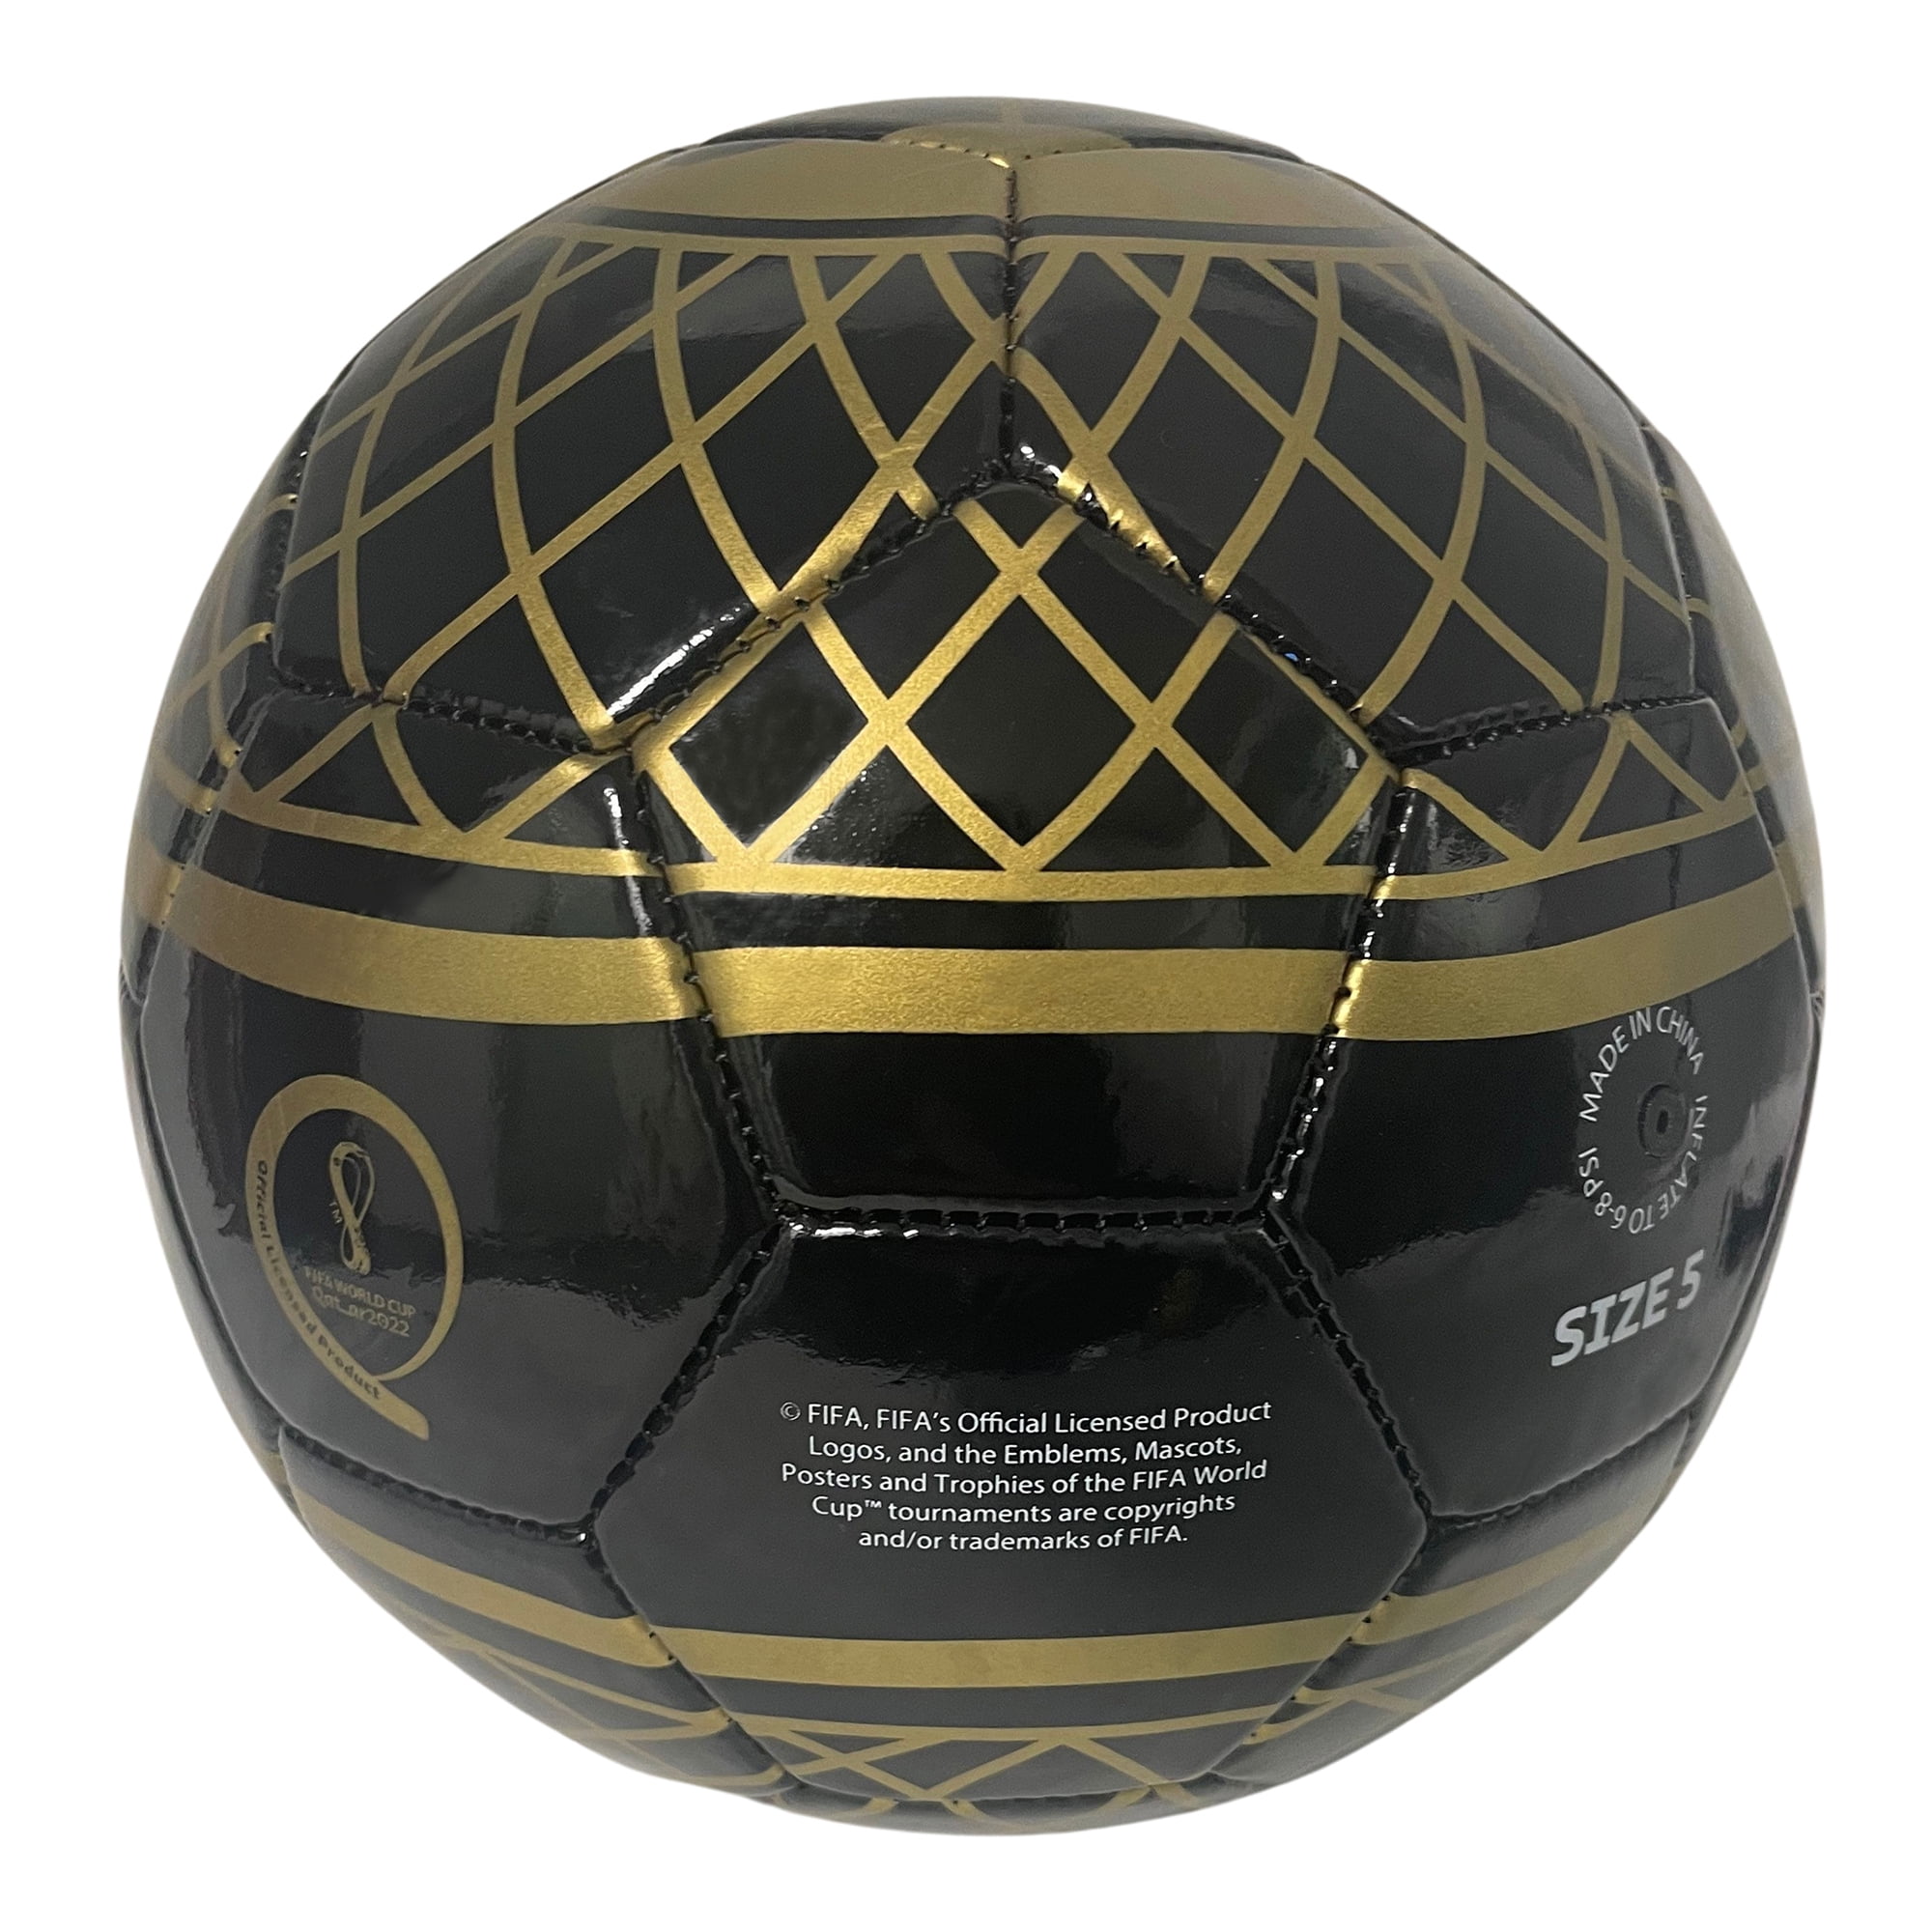 Argentum 23 Pro 3 STAR Ball Size 5 Soccer FIFA Quality Pro FREE SHIPPING